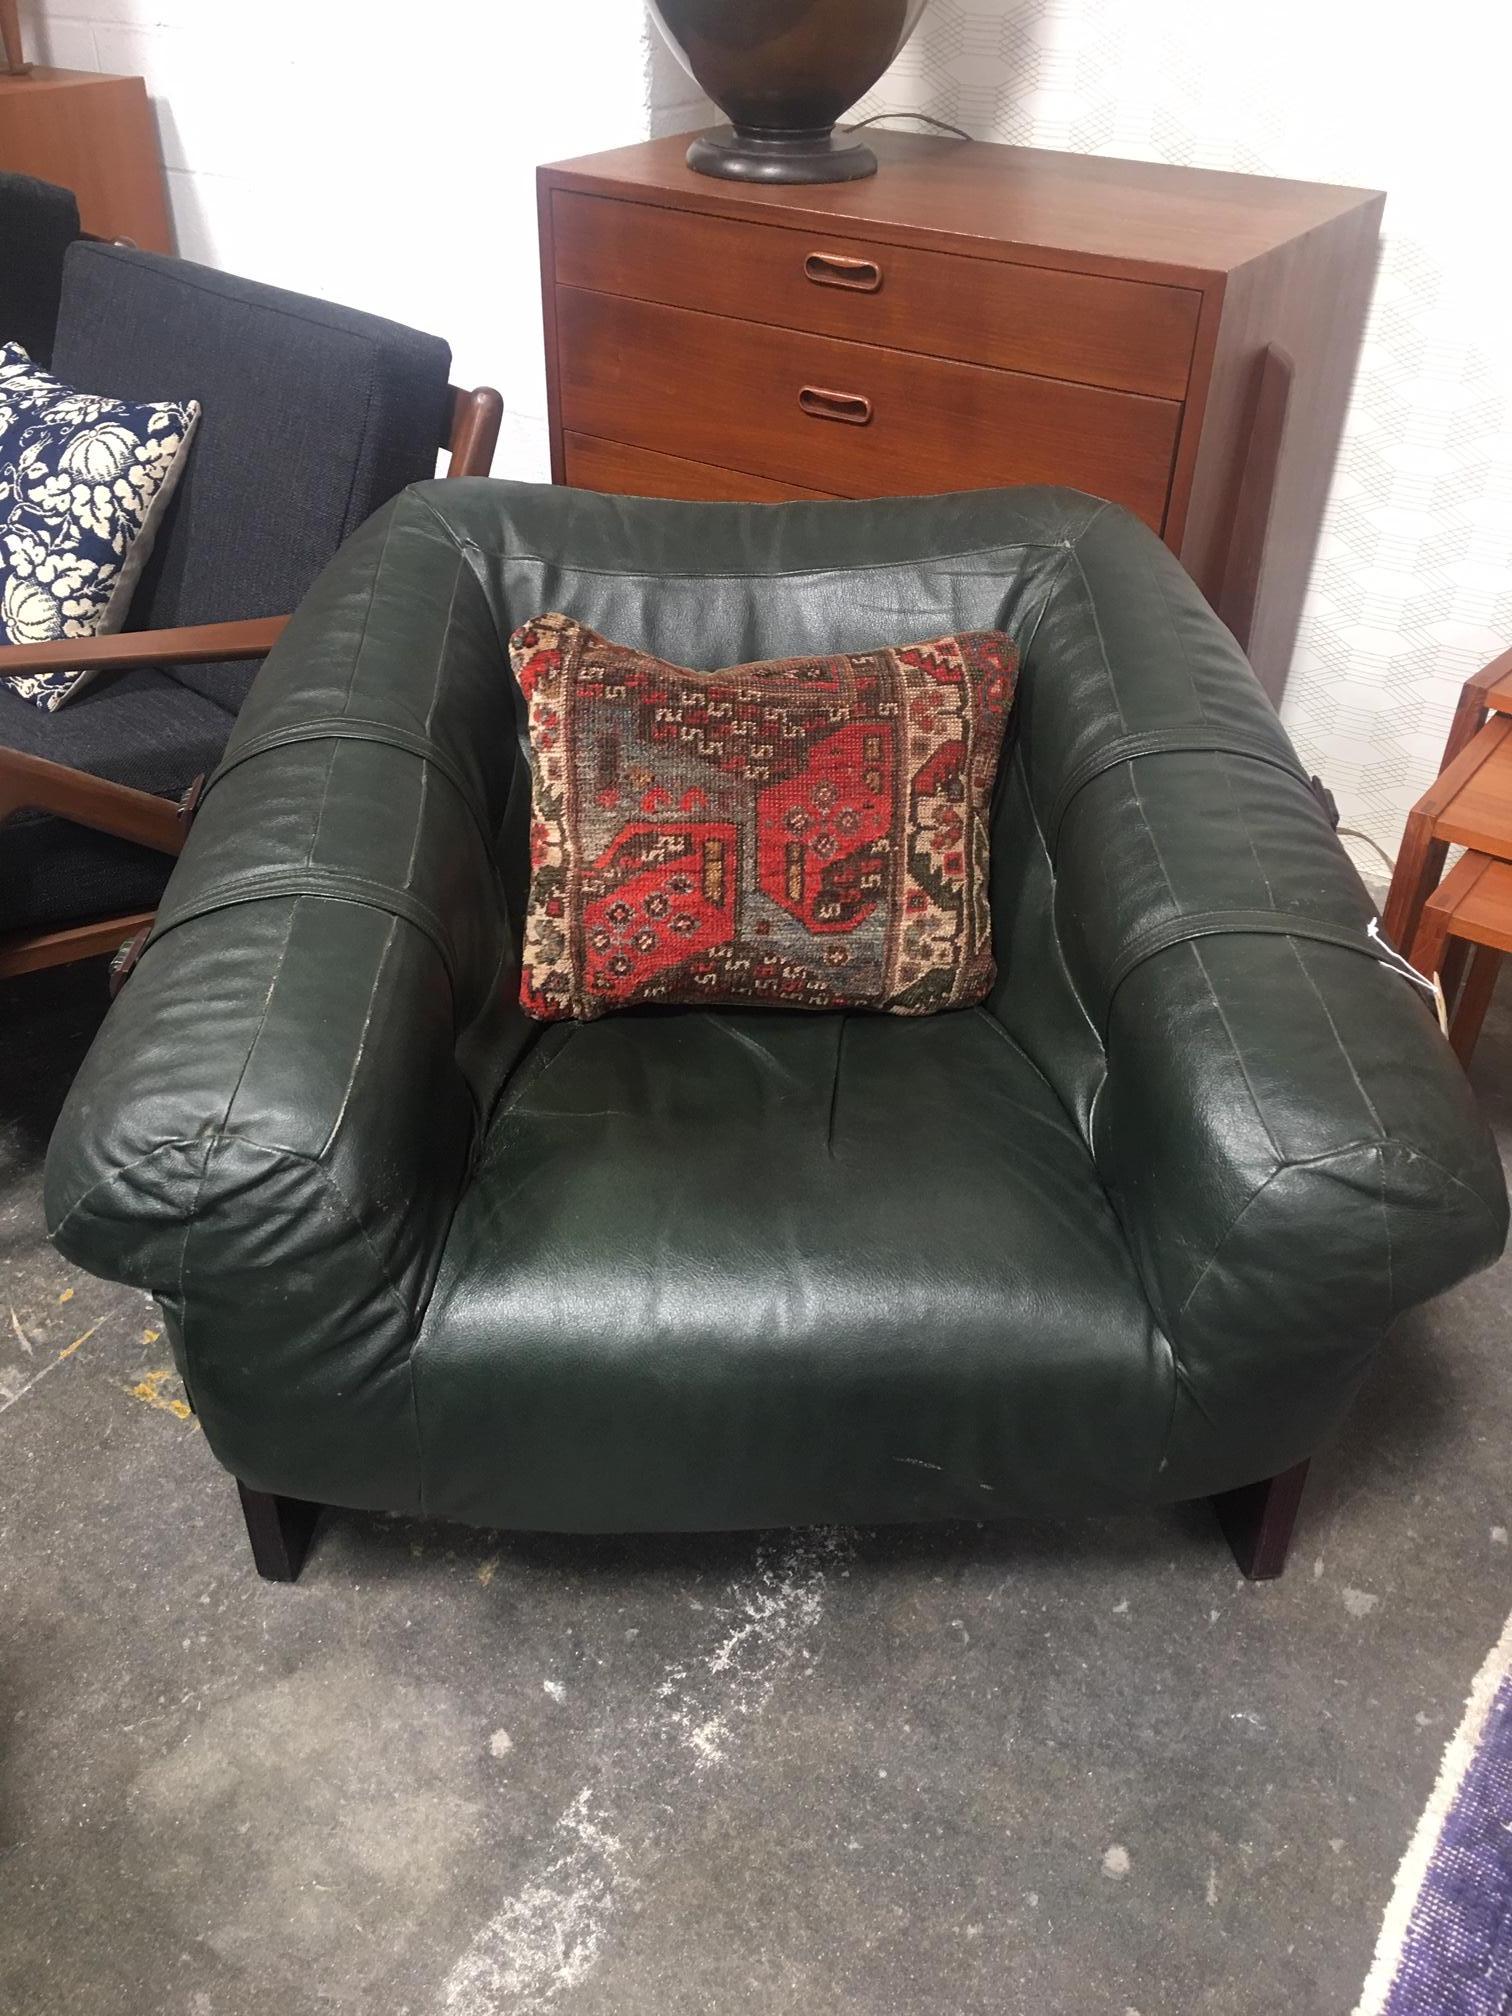 Pair of dark green leather Percival Lafer chairs. Leather is in great condition!